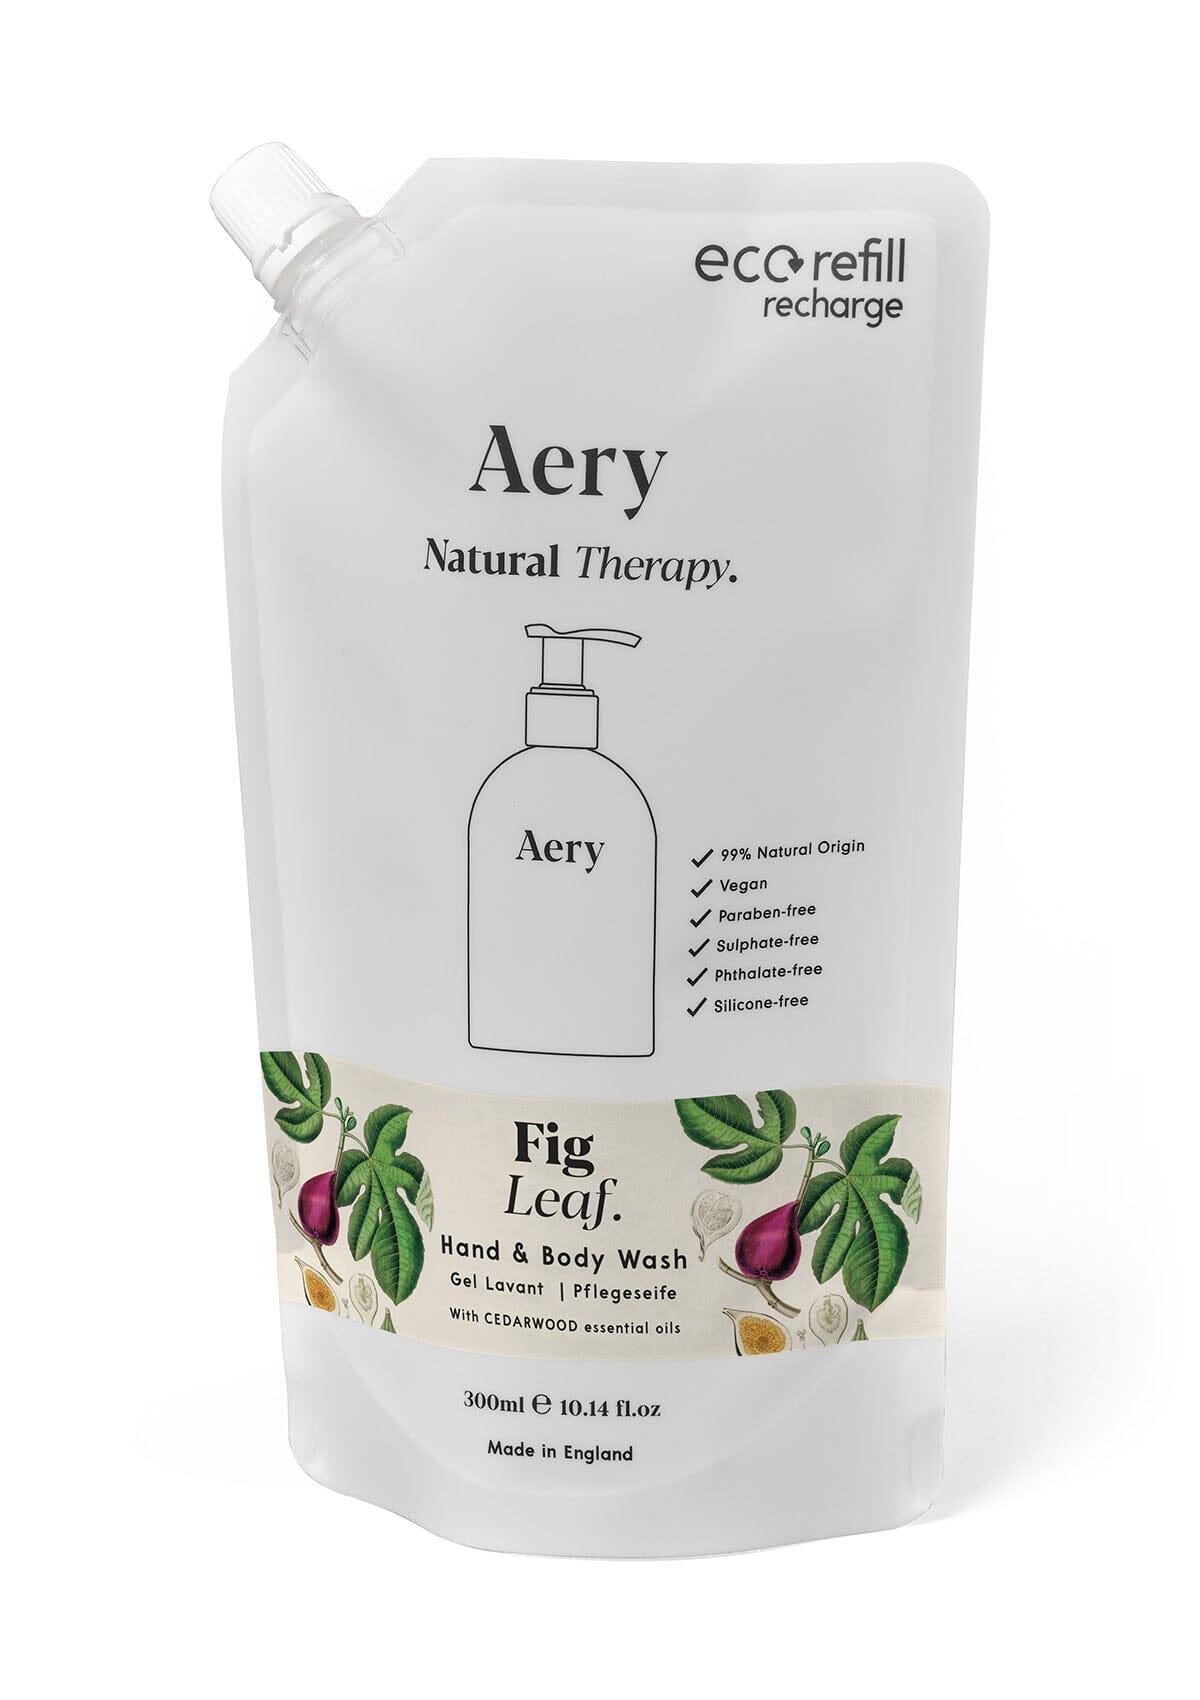 Cream Fig leaf hand and body wash refill pouch by aery displayed on white background 